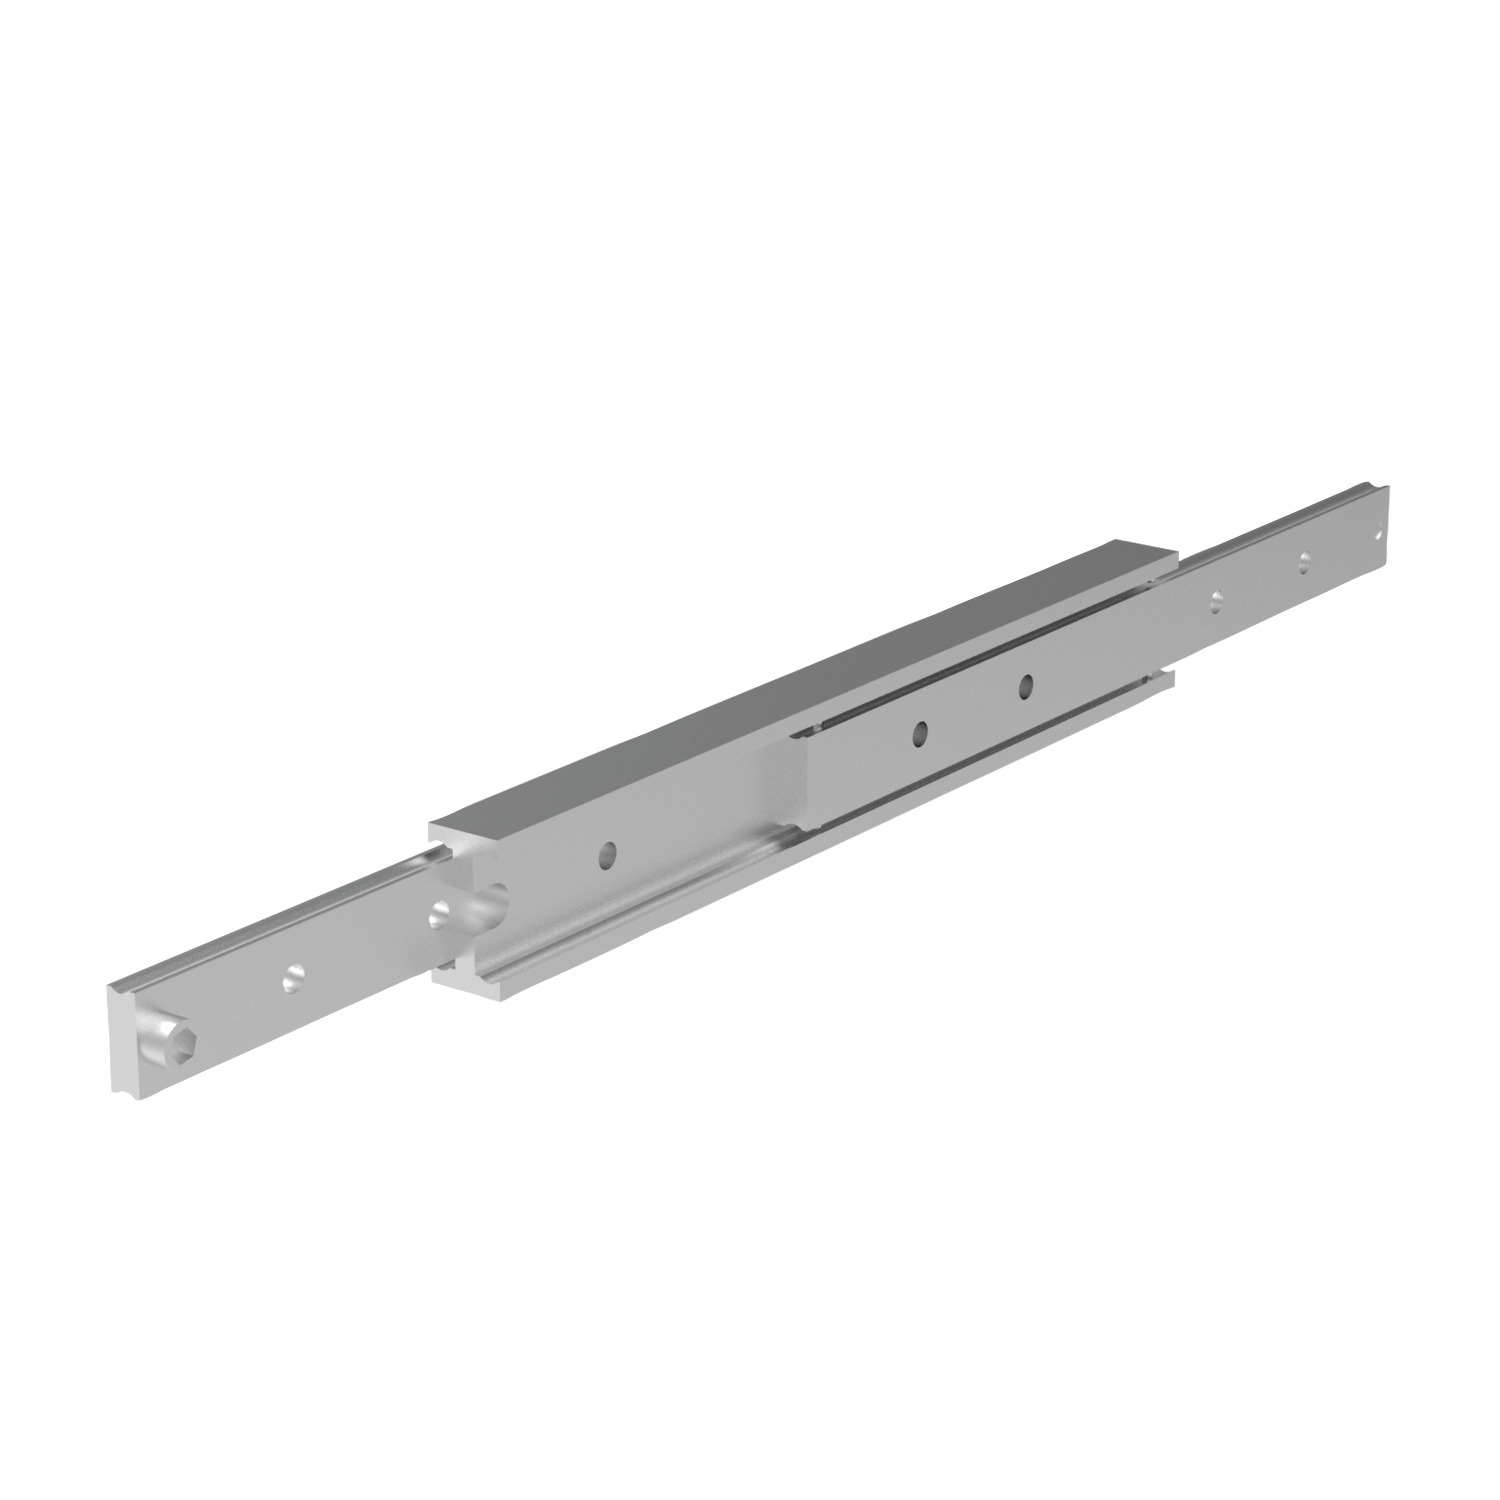 Aluminium Telescopic Slides Telescopic linear motion in lightweight, corrosion resistant aluminium (anodised). With steel ball bearings and cage for added hardness.